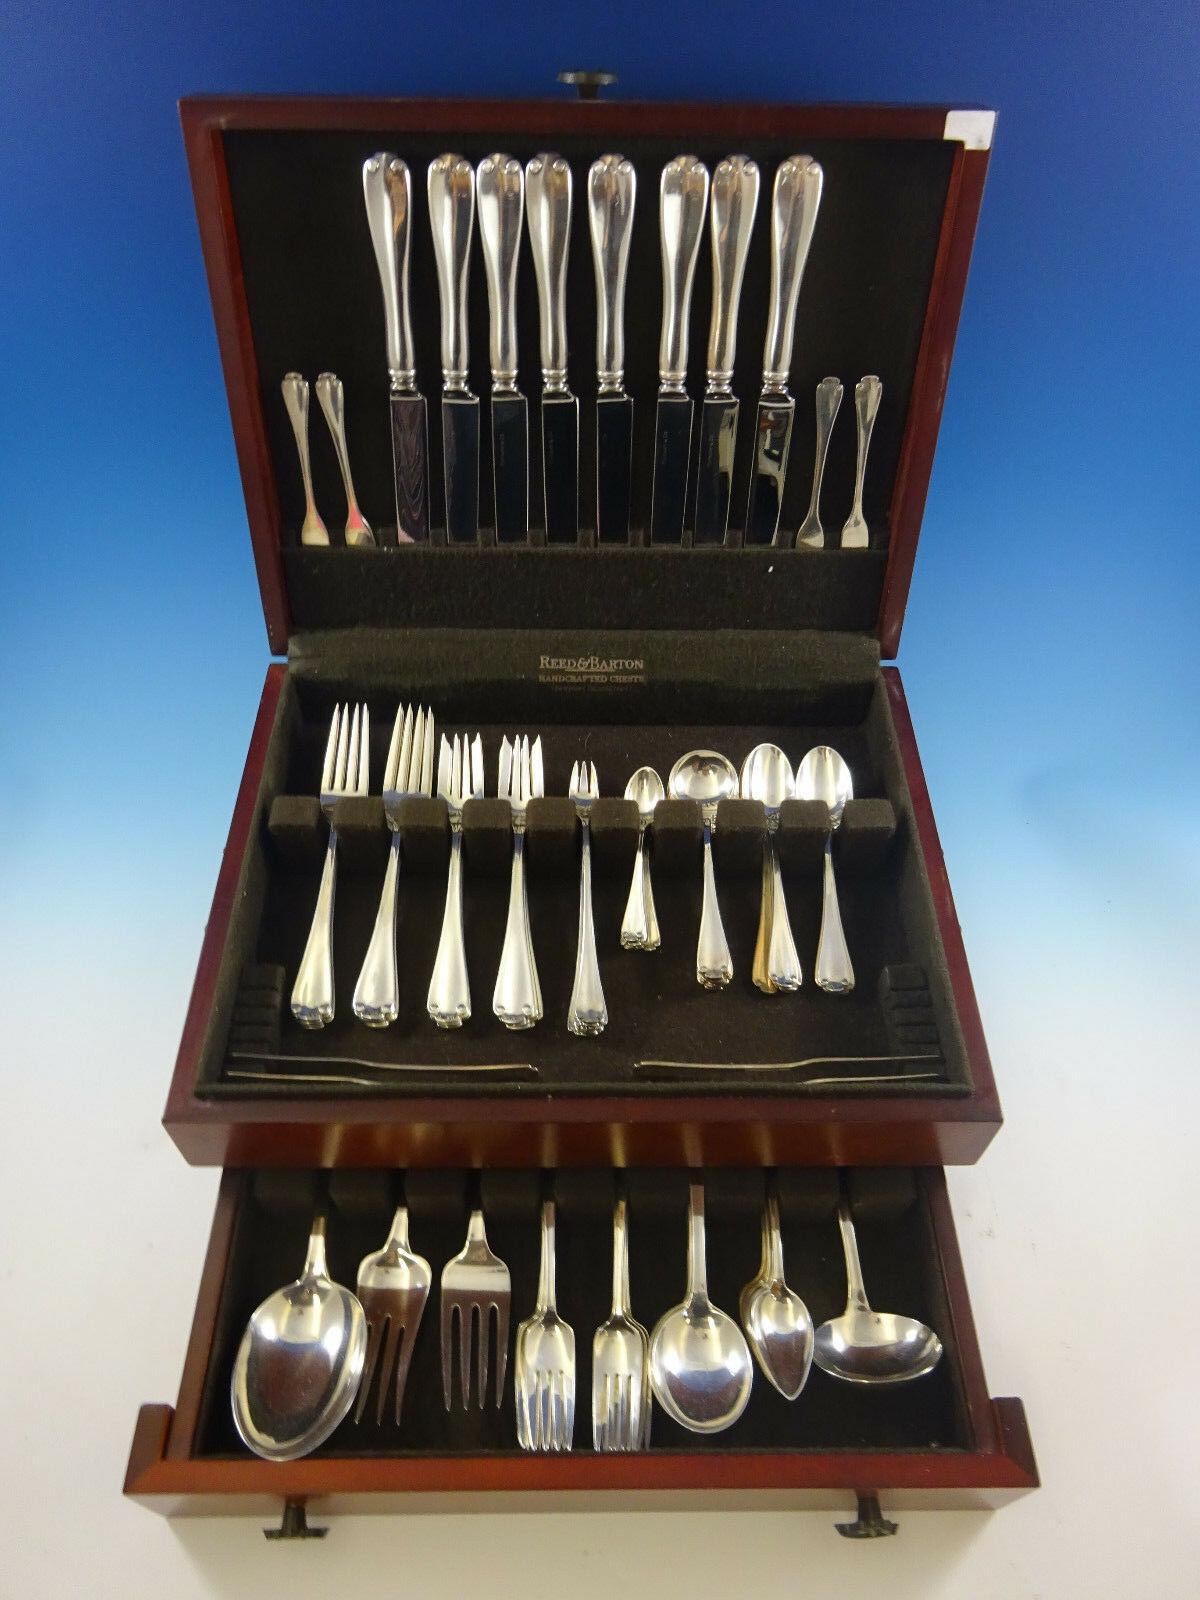 Exceptional Flemish by Tiffany & Co. sterling silver dinner size flatware set, 92 pieces. This set includes:

8 dinner size knives, 10 1/4